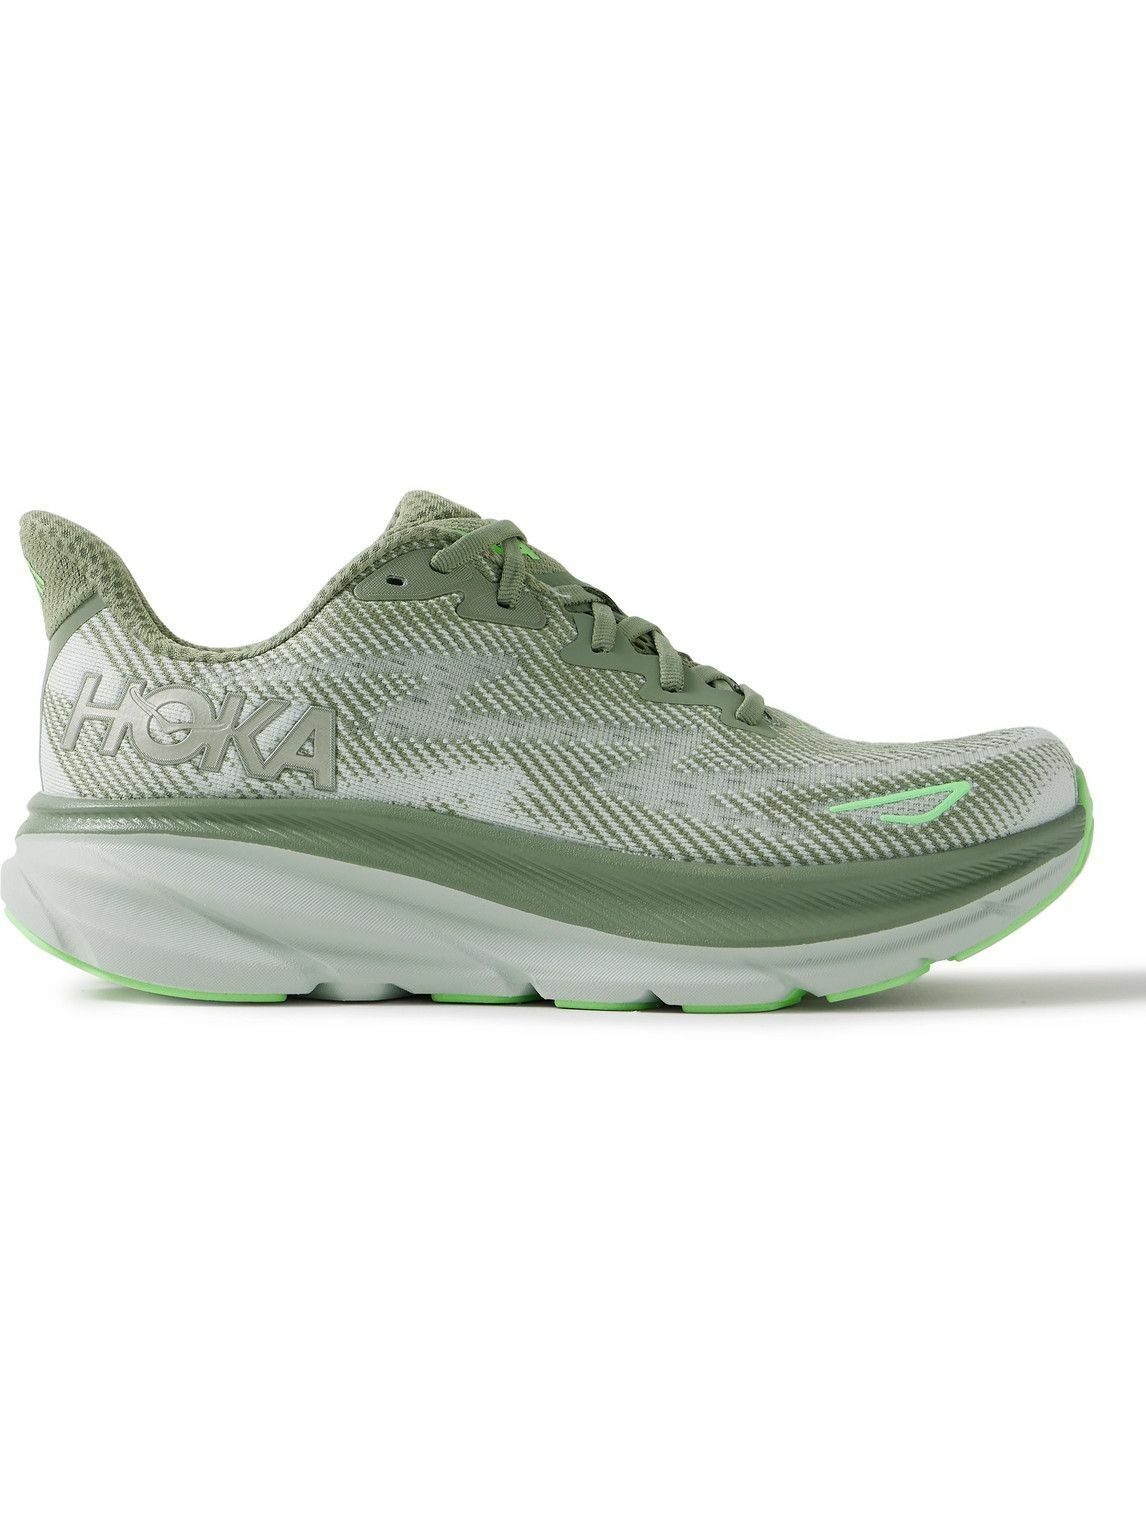 Hoka One One - Clifton 9 Rubber-Trimmed Mesh Running Sneakers - Green ...